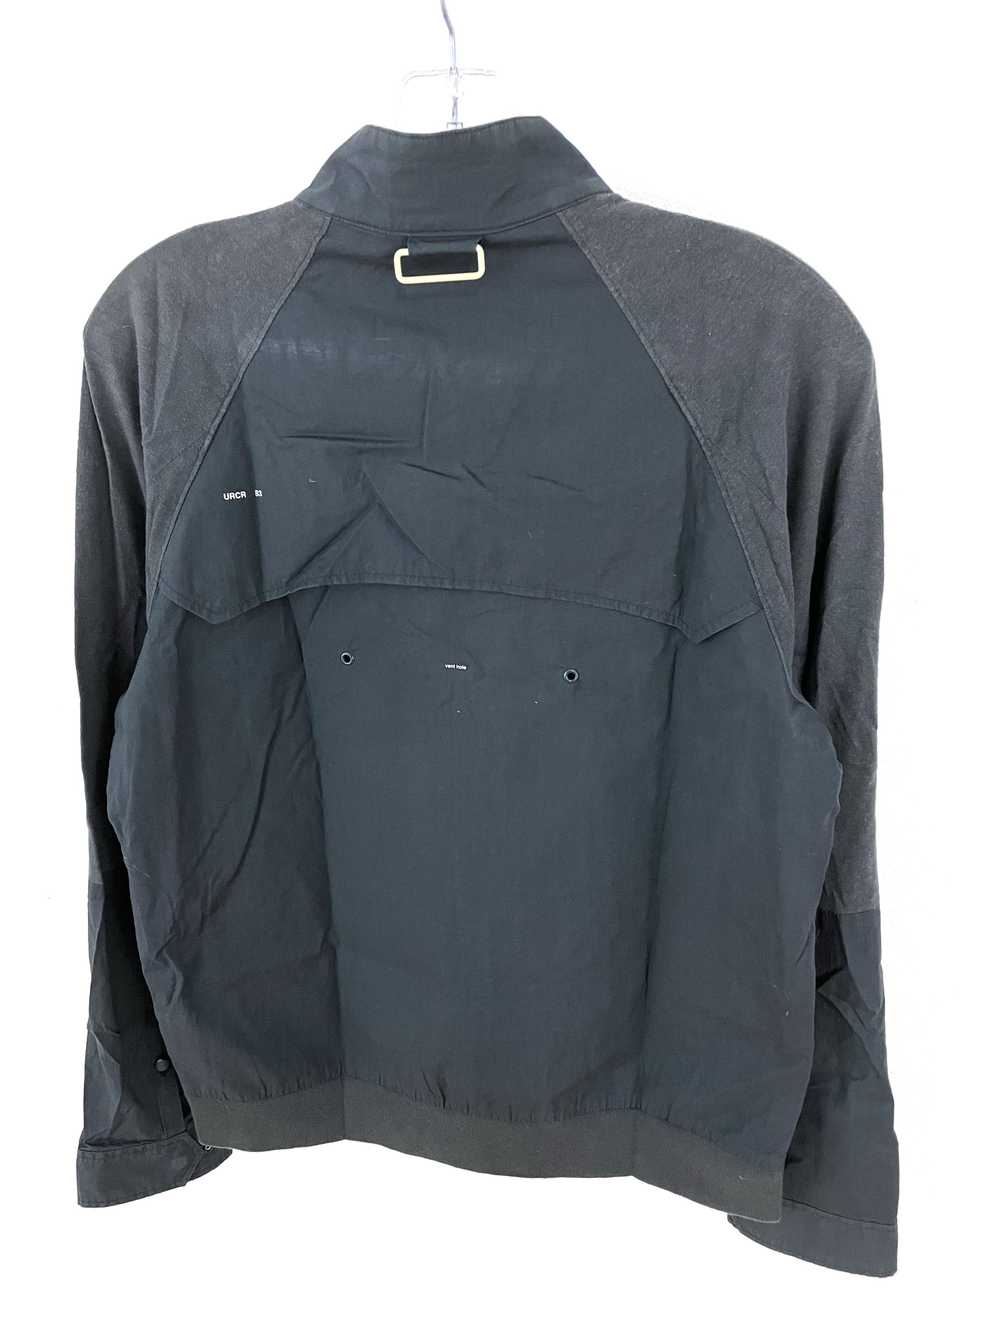 UNDERCOVER SS10 Less But Better Jacket - image 9